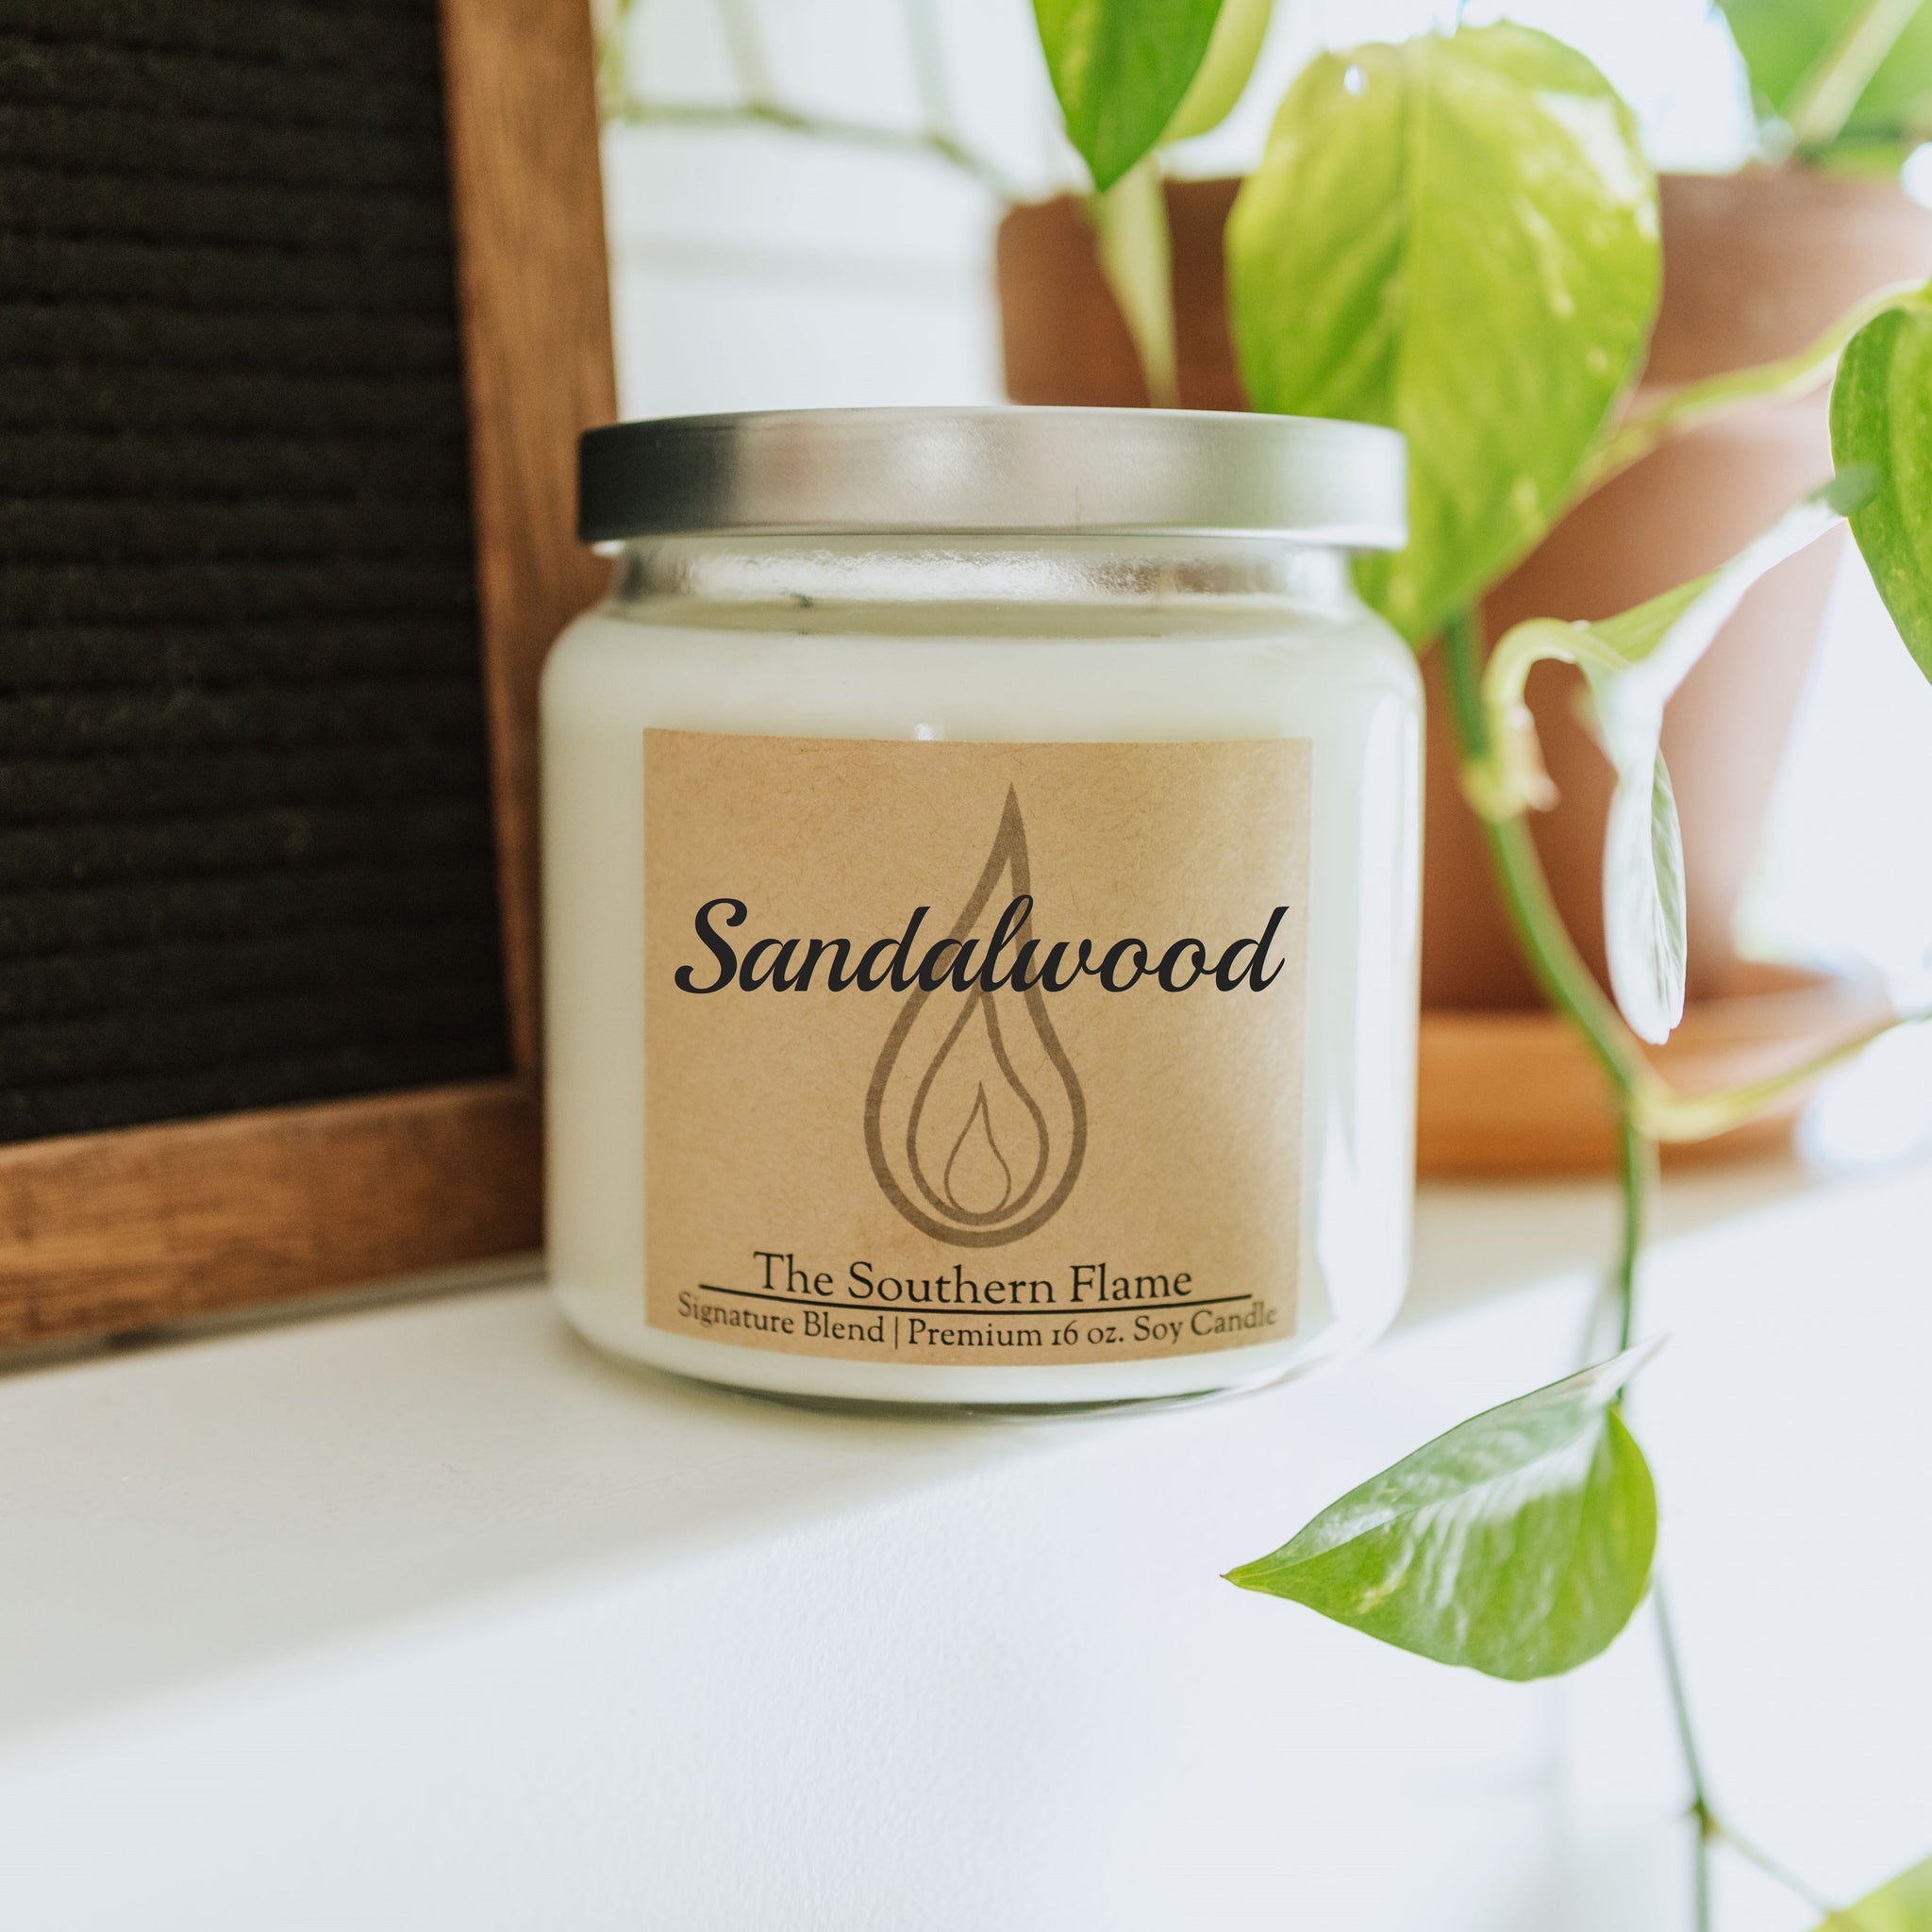 Sandalwood – The Southern Flame